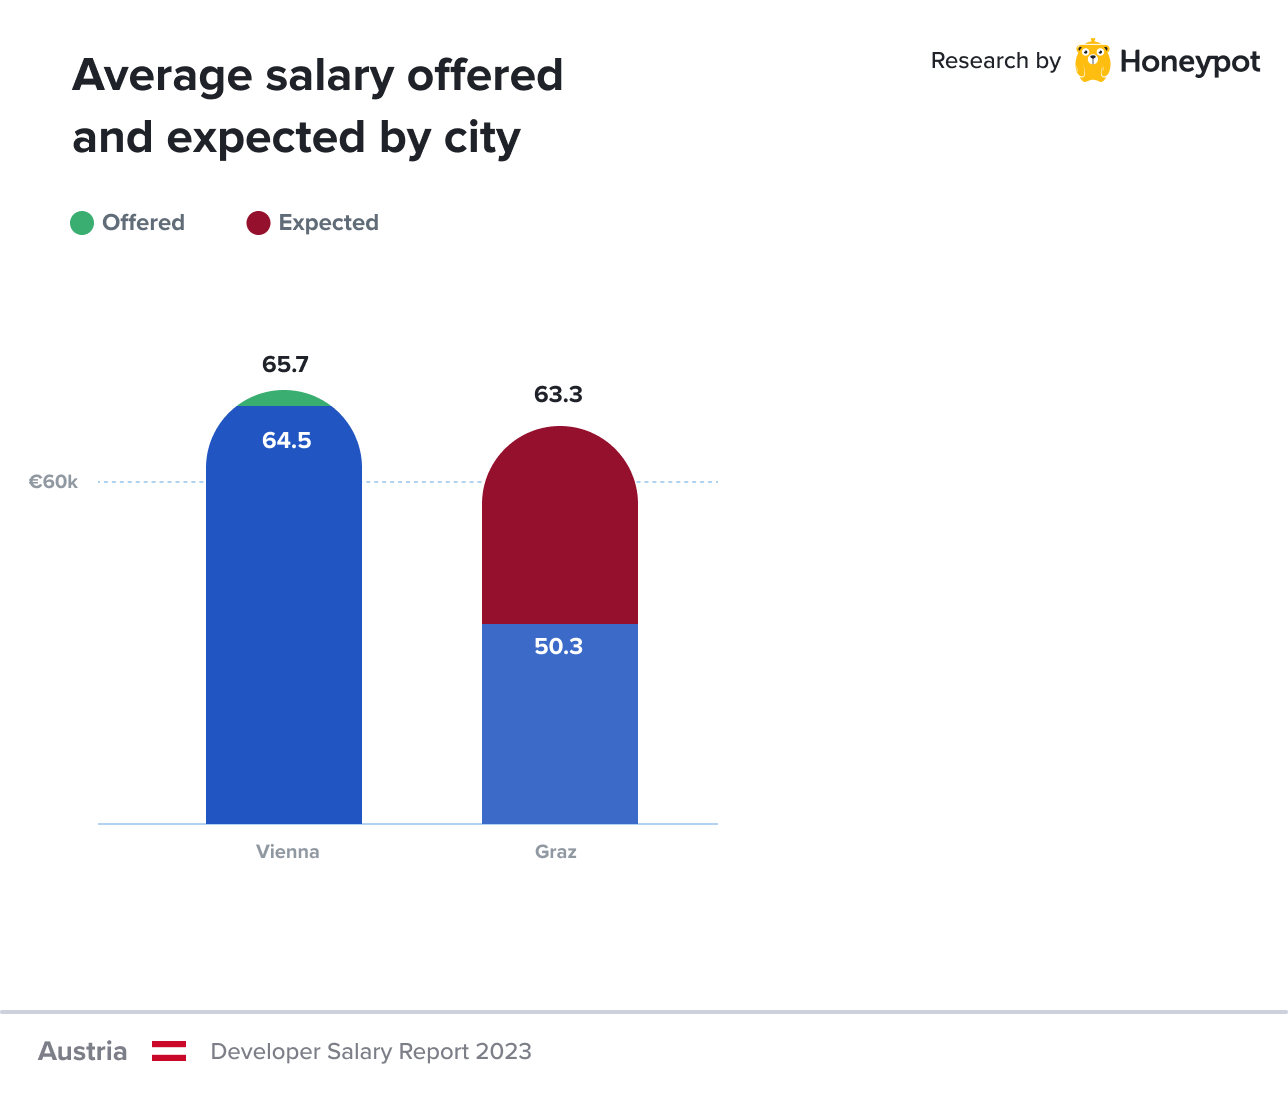 Austria – Average salary offered and expected by city